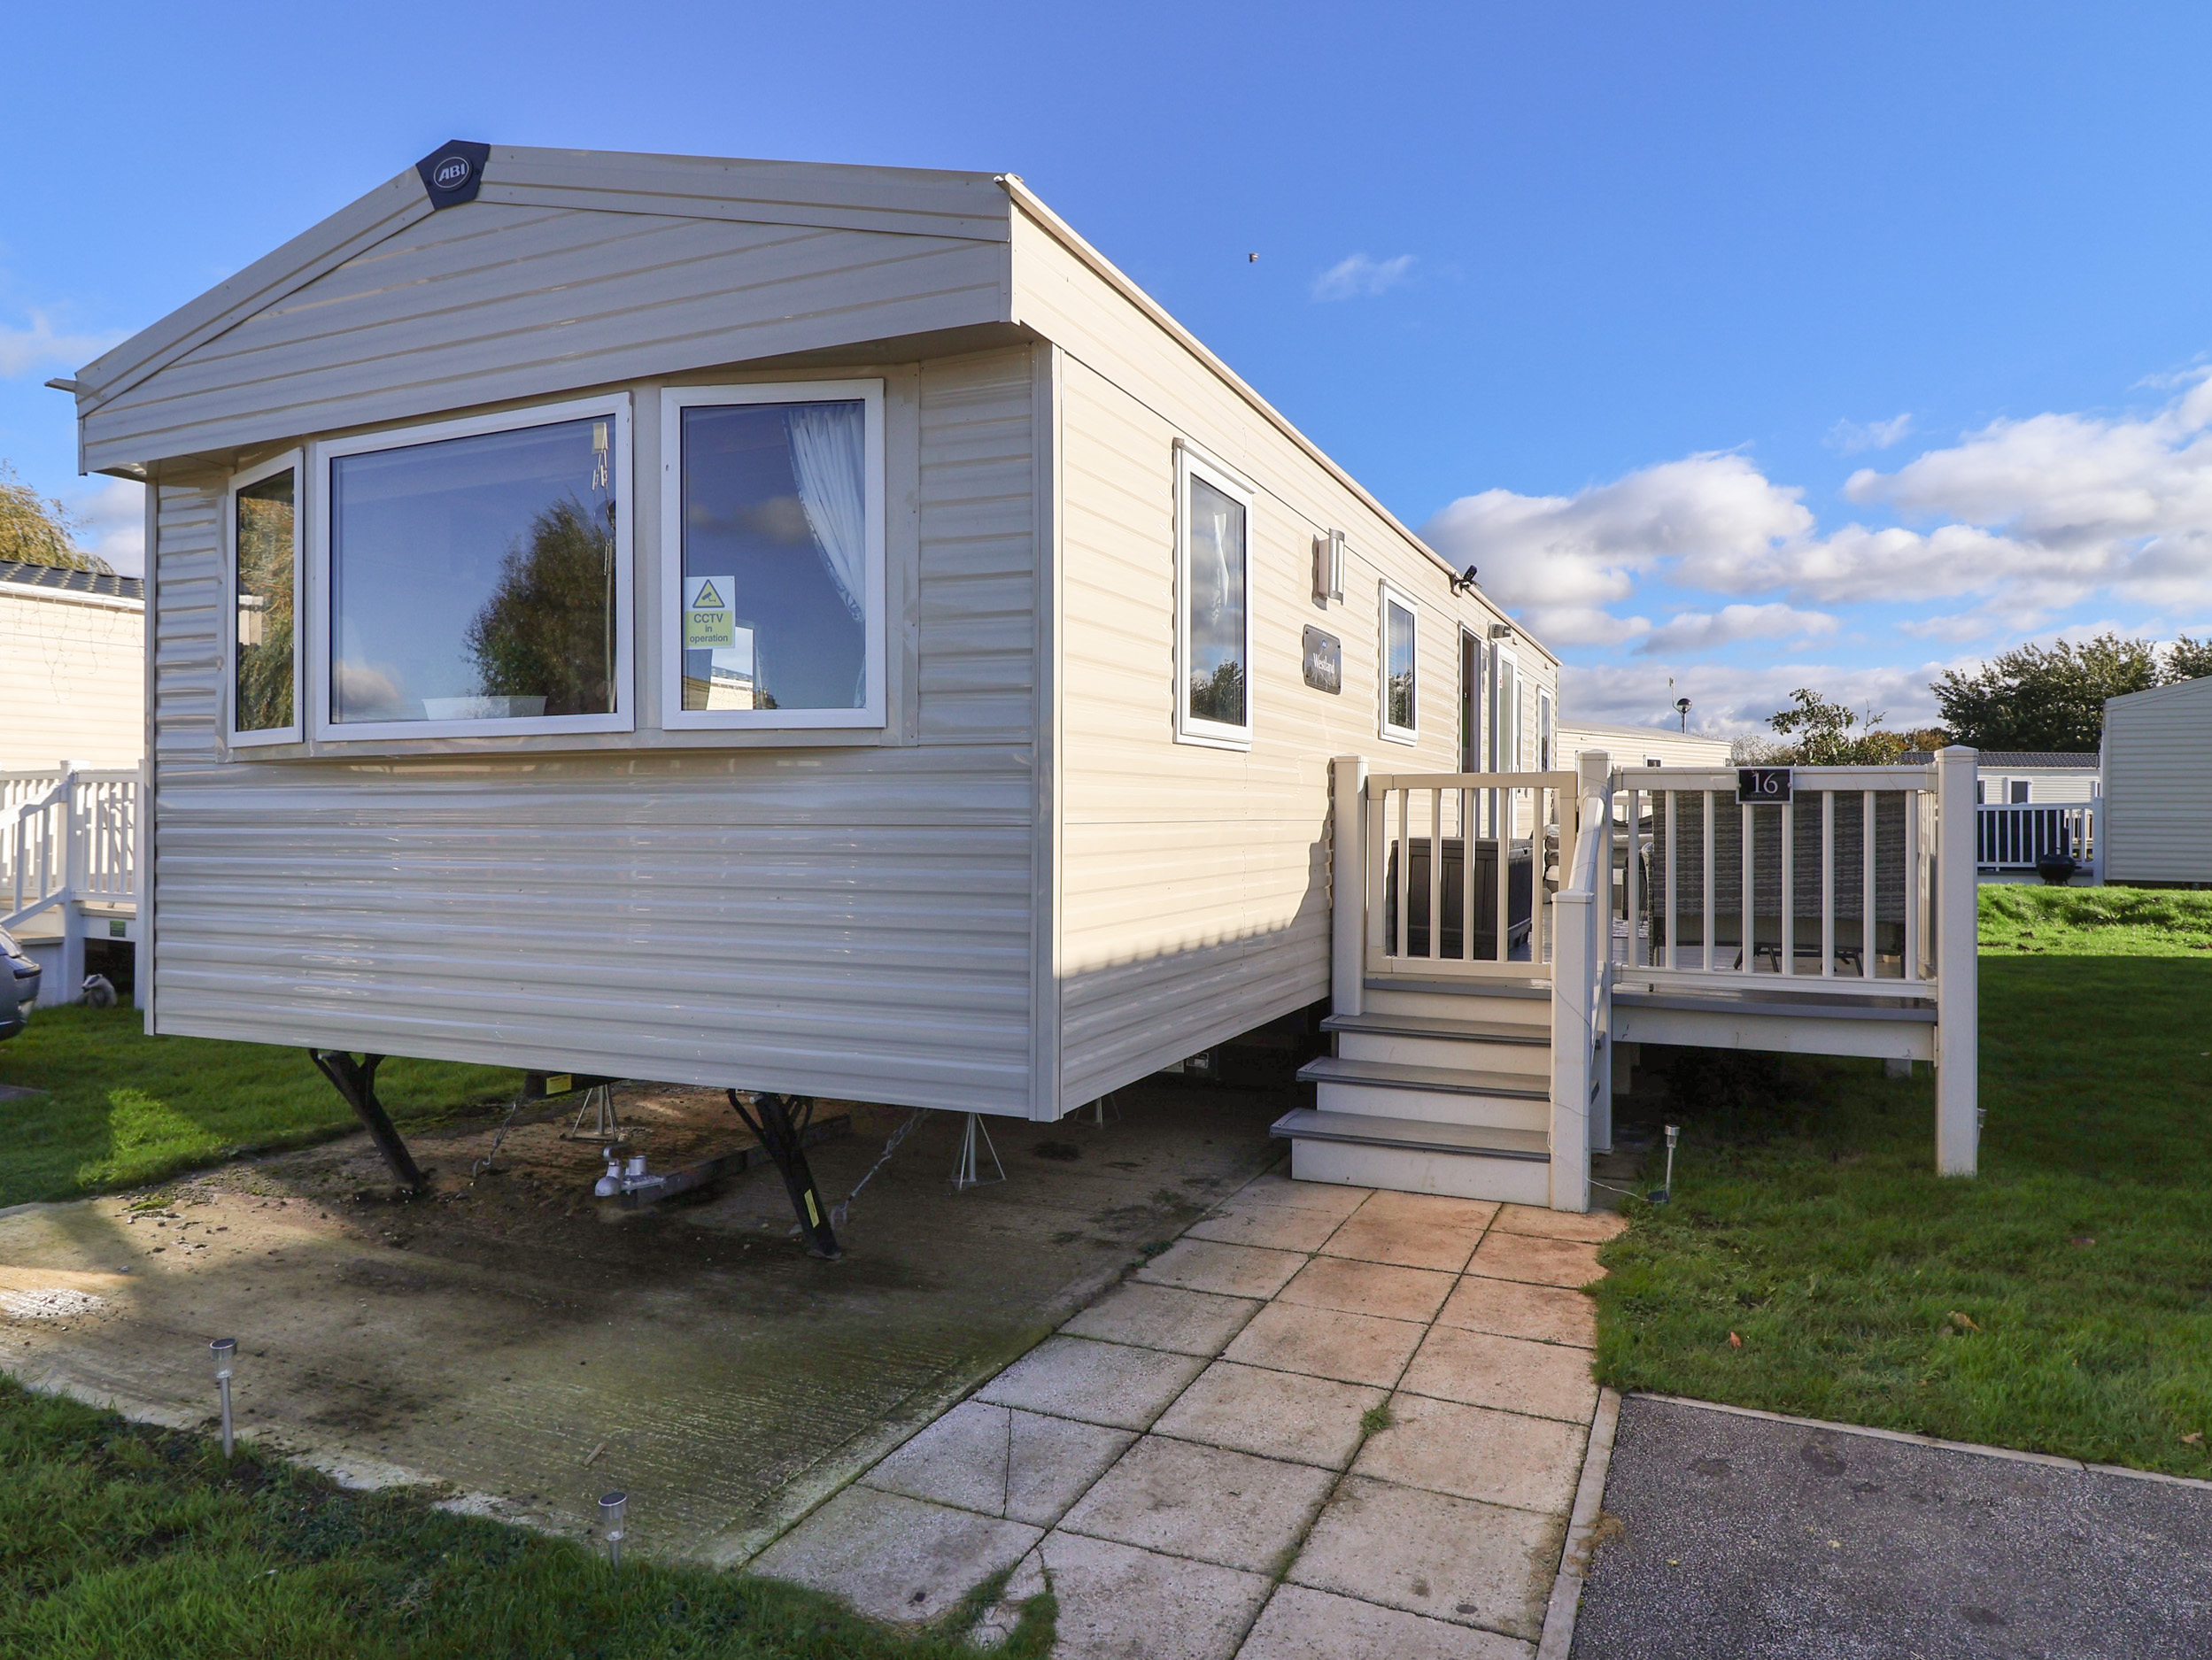 HD Retreat, a single-storey caravan in Tattershall, Lincolnshire with hot tub, one pet, and Smart TV